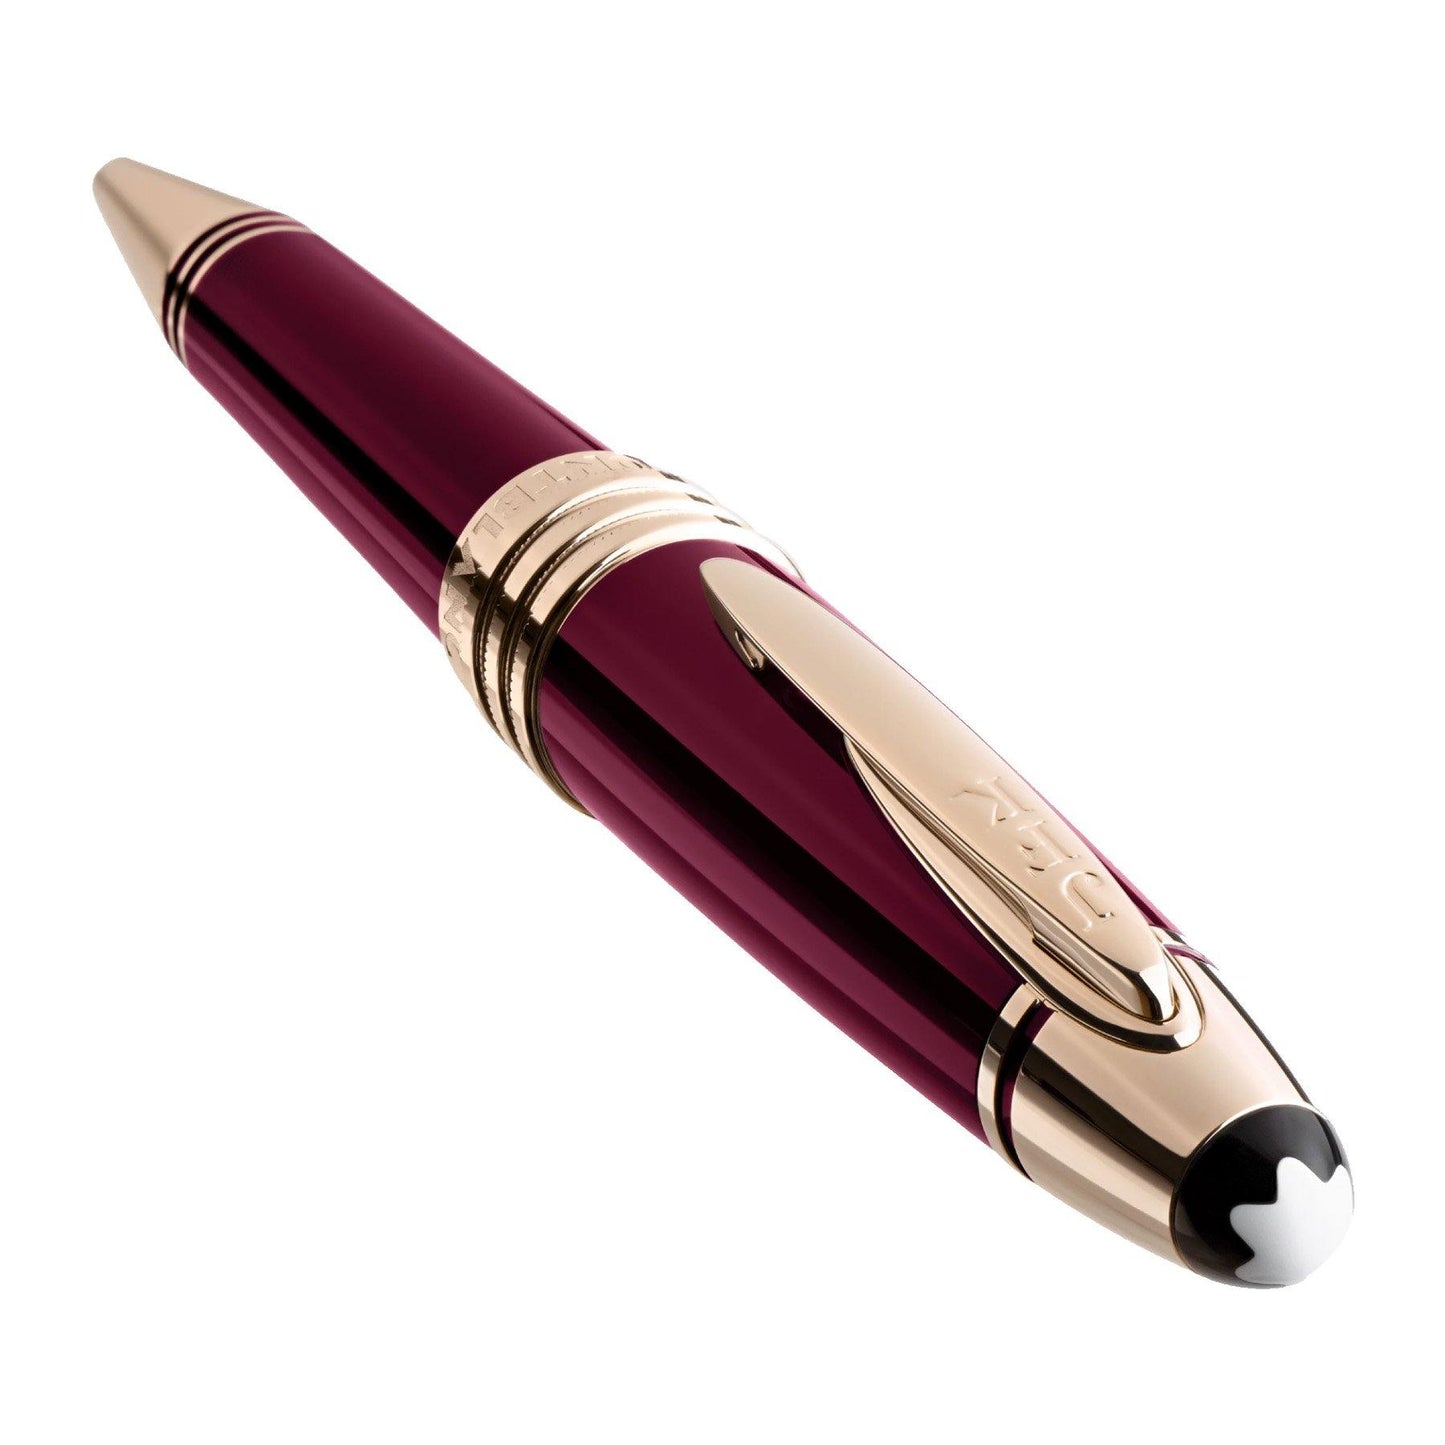 John F. Kennedy Special Edition Burgundy Ballpoint Pen - Cosmos Boutique New Jersey